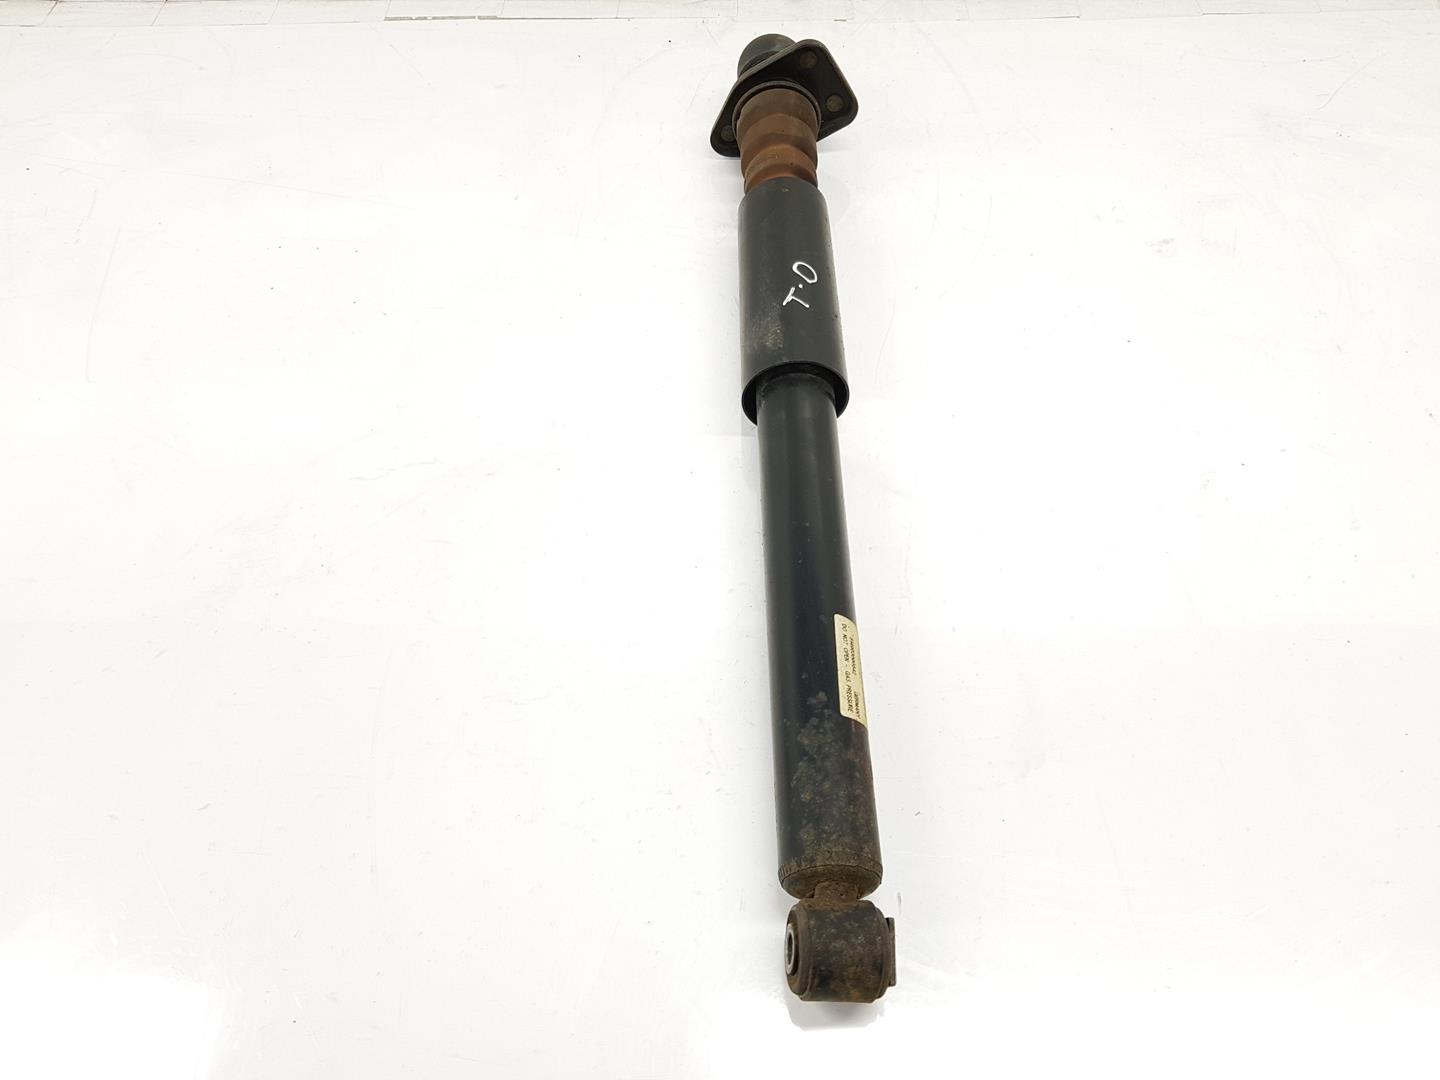 BMW X3 E83 (2003-2010) Rear Right Shock Absorber 33503413789, 3413789 21631098